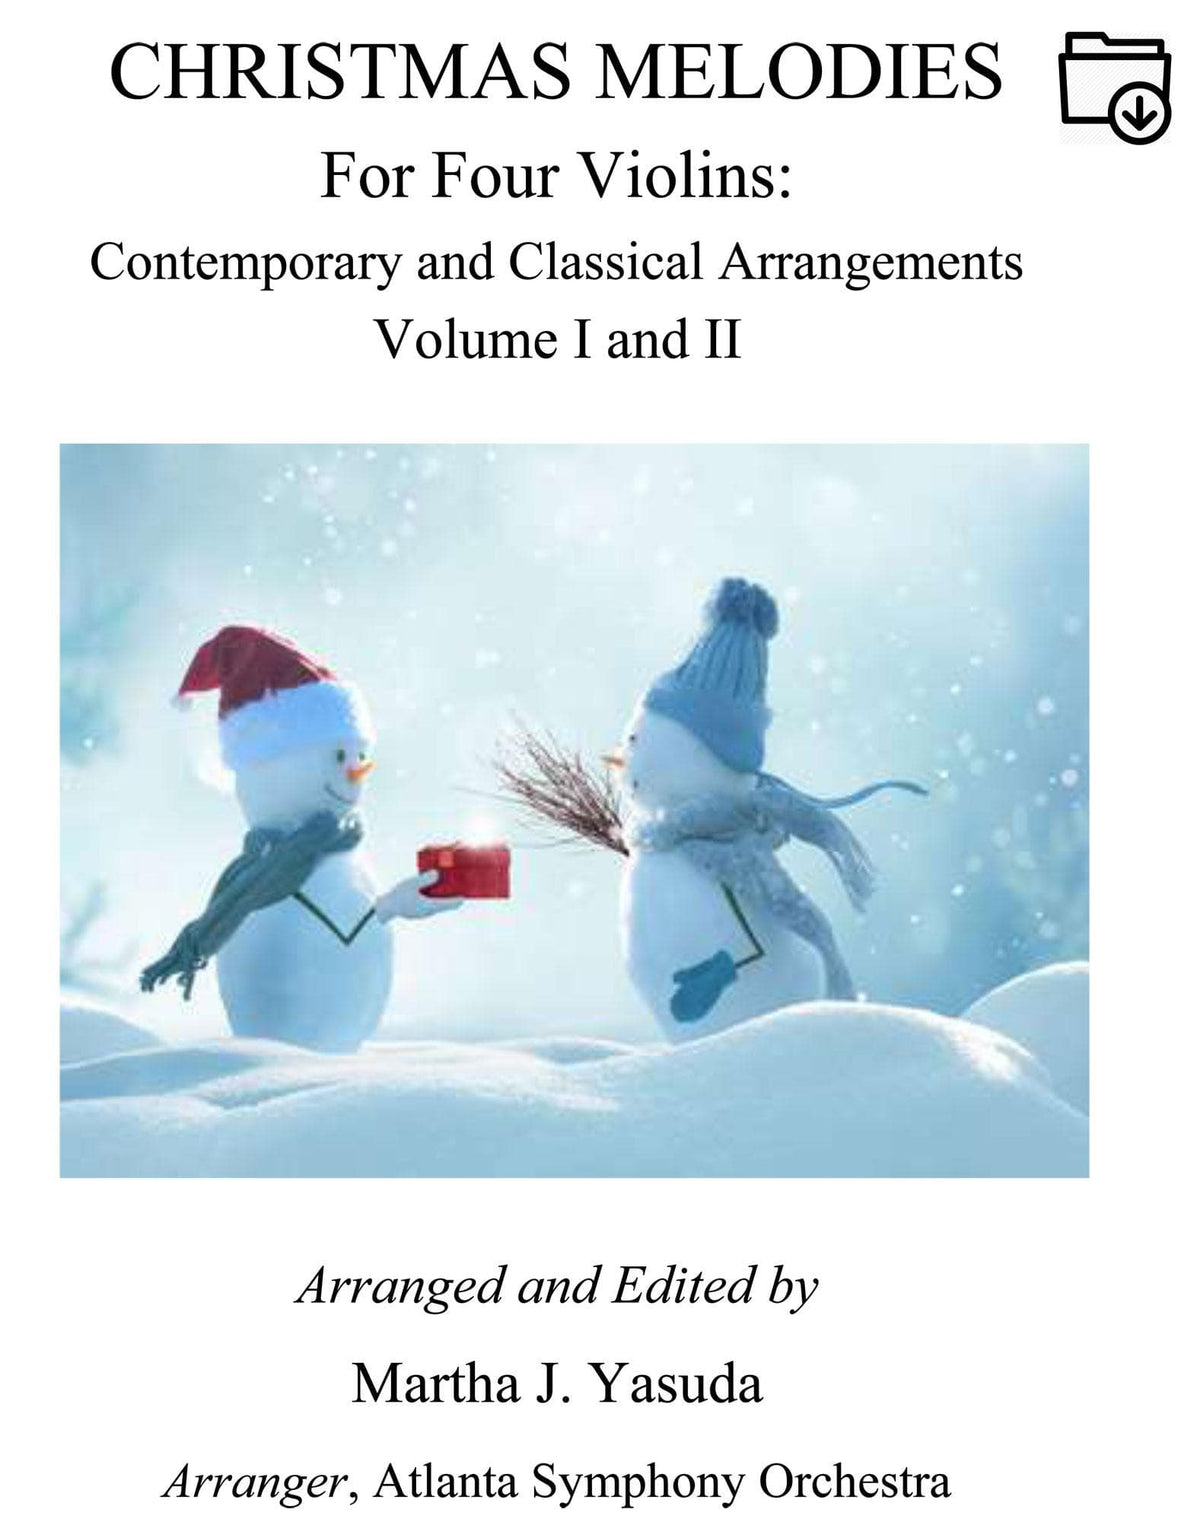 Yasuda - Christmas Melodies For 4 Violins, Volumes I & II: Contemporary & Classical Arr. - Dig. DL